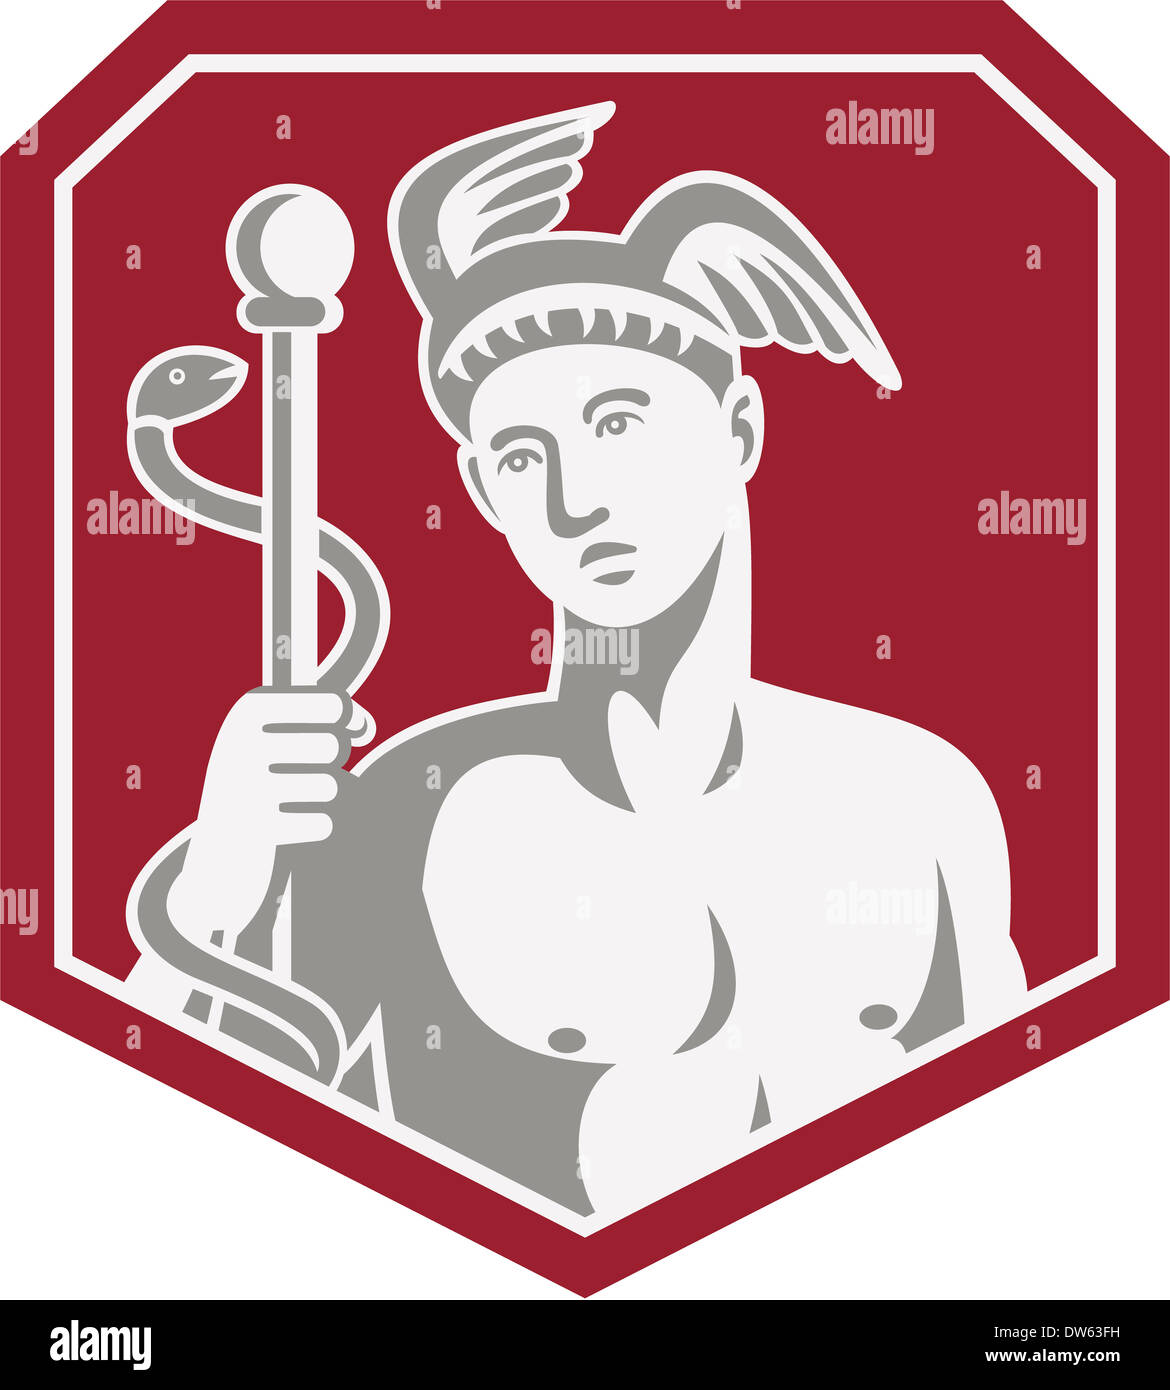 Illustration of Roman god Mercury wearing winged hat holding caduceus a herald's staff with two entwined snakes looking to side Stock Photo